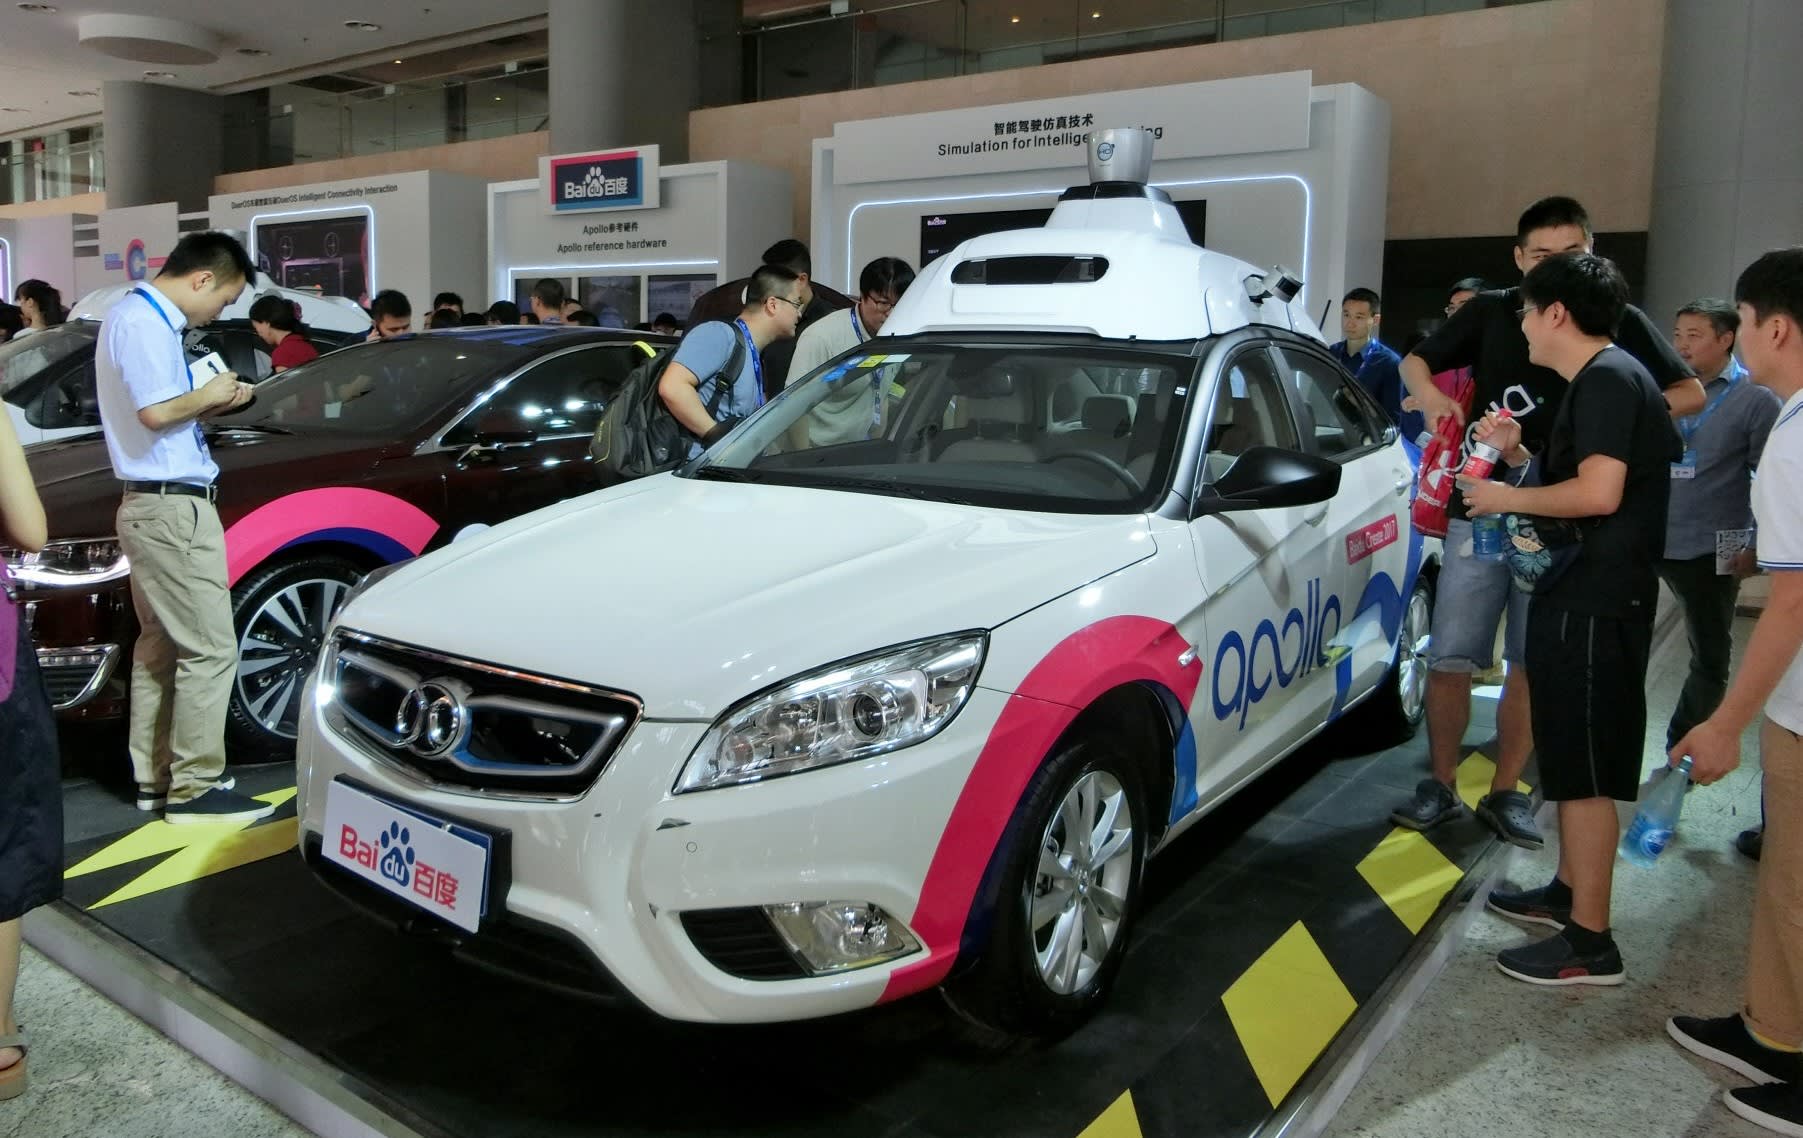 Daimler and China's Baidu deepen automated driving alliance